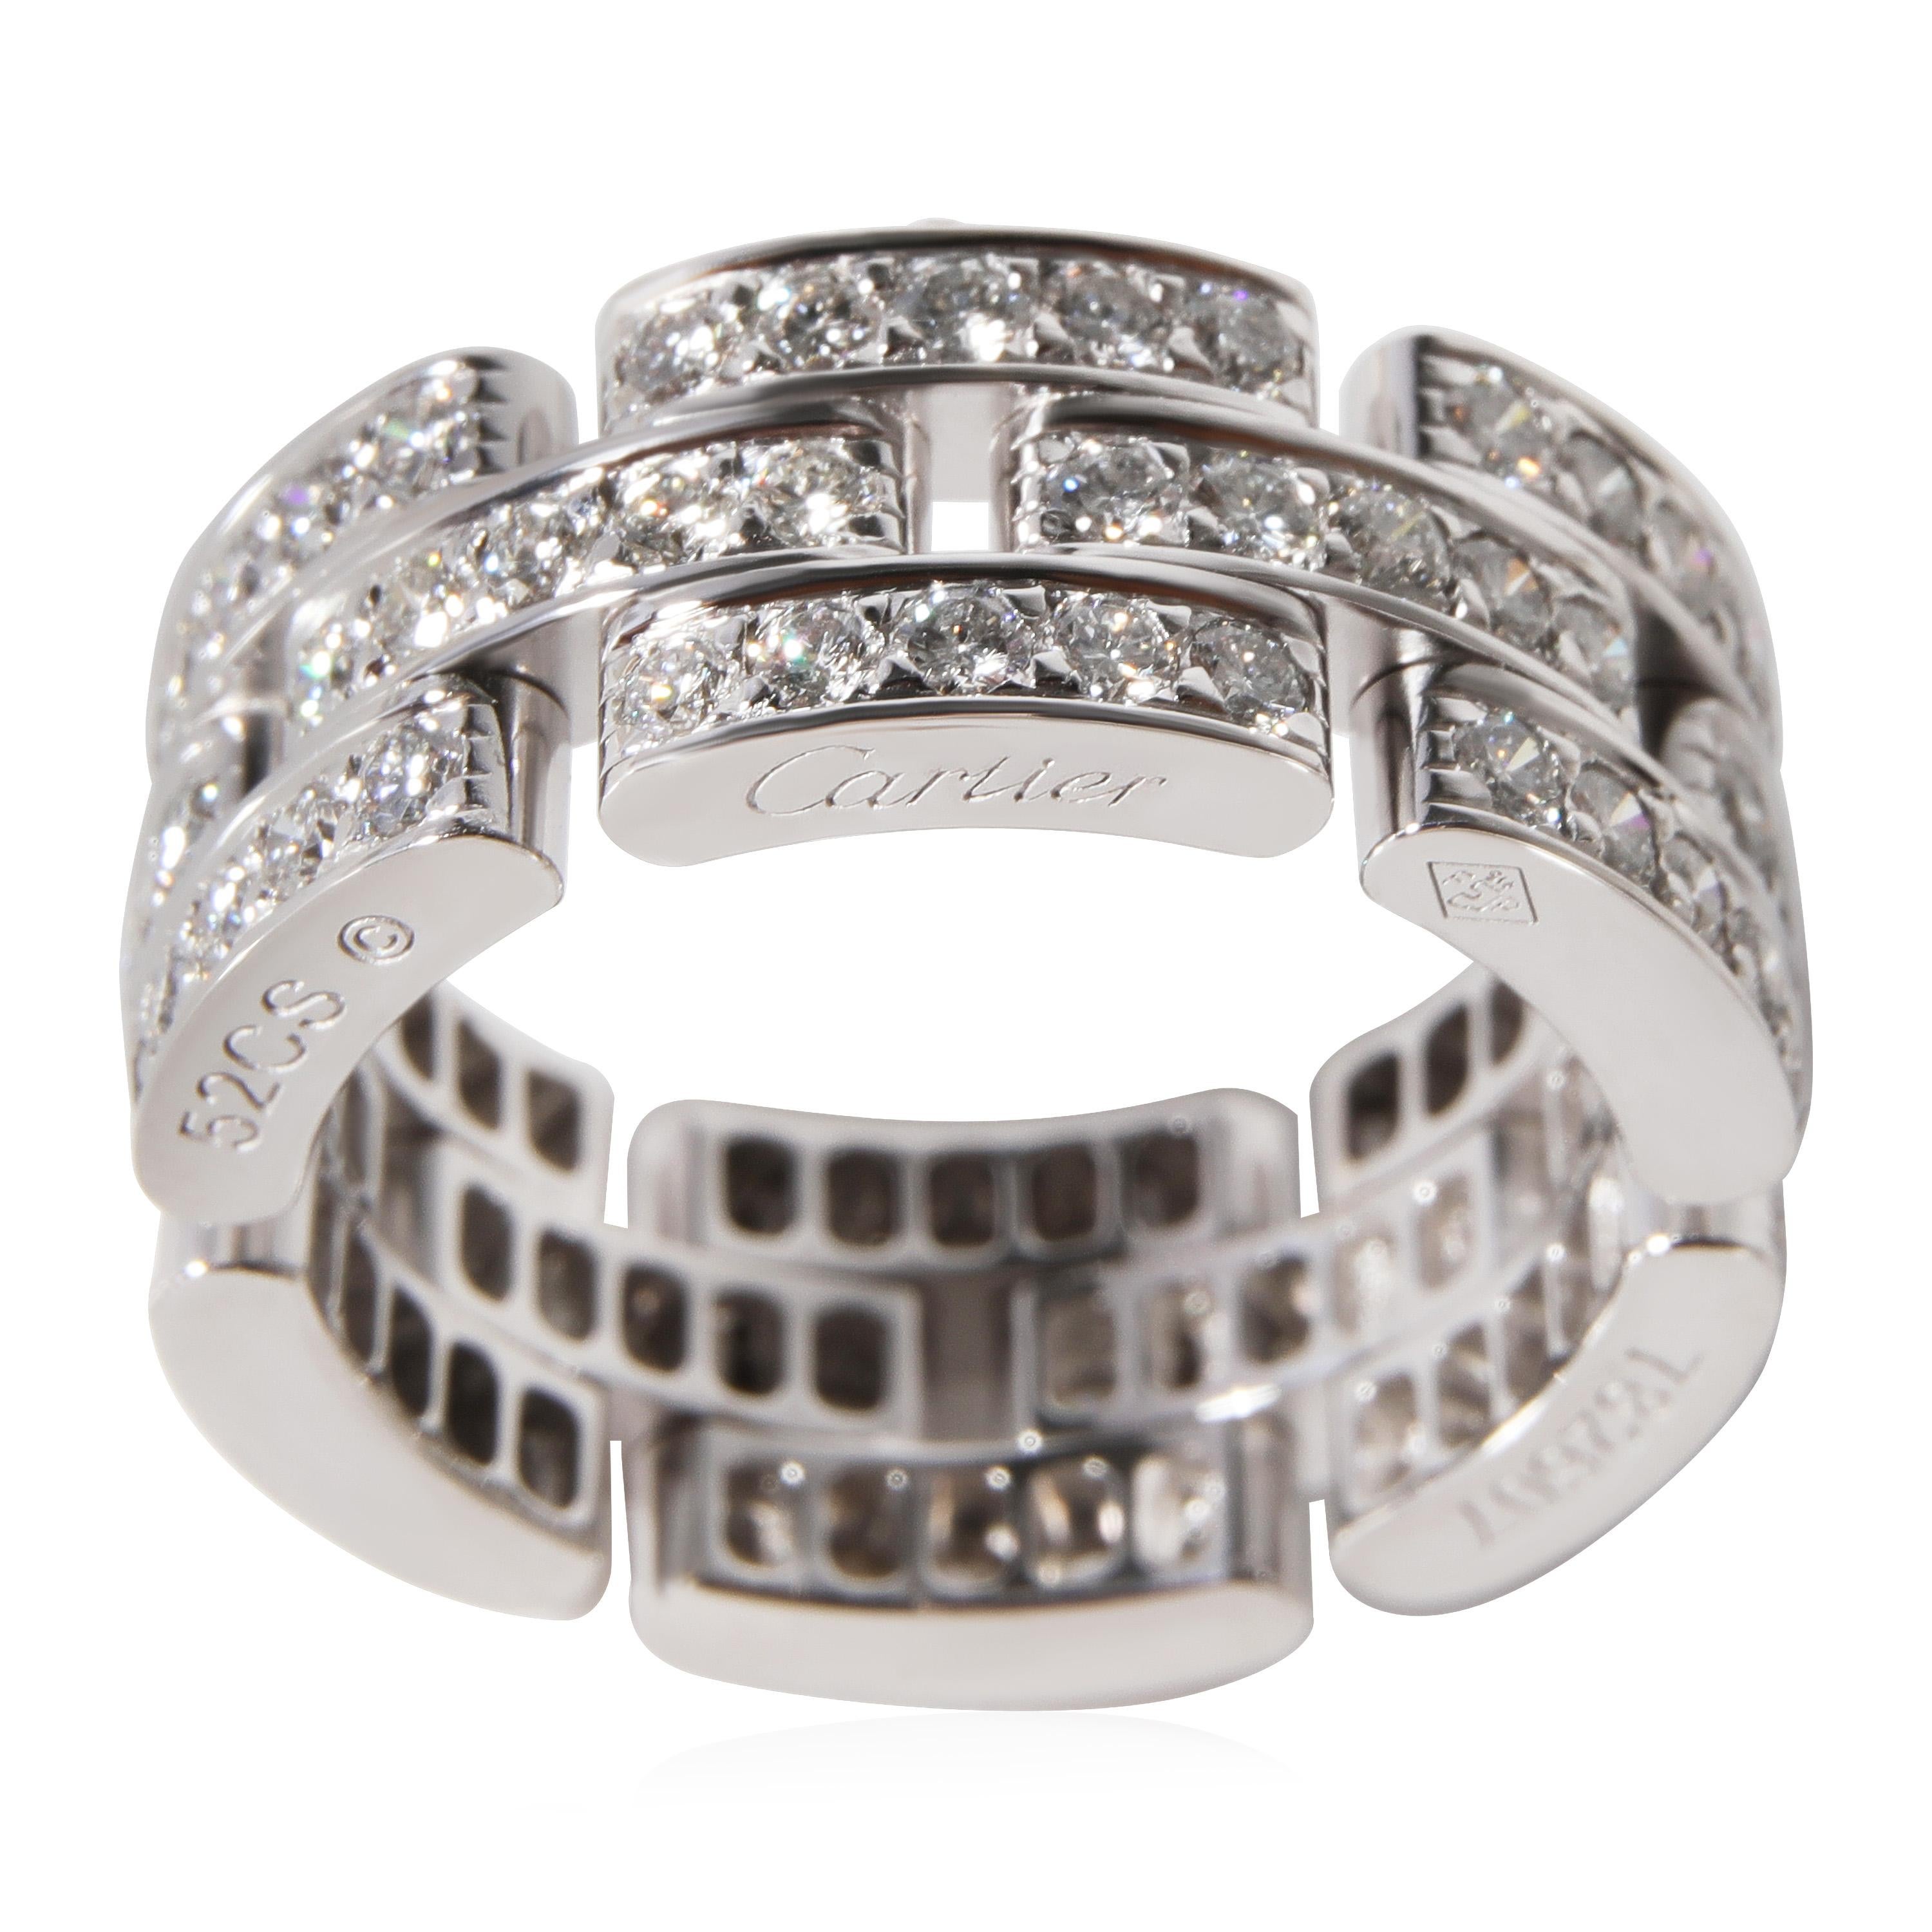 Cartier Maillon Panthere Diamond Ring in 18KT White Gold 1.37 CTW

PRIMARY DETAILS
SKU: 118723
Listing Title: Cartier Maillon Panthere Diamond Ring in 18KT White Gold 1.37 CTW
Condition Description: Retails for 15900 USD. In excellent condition and